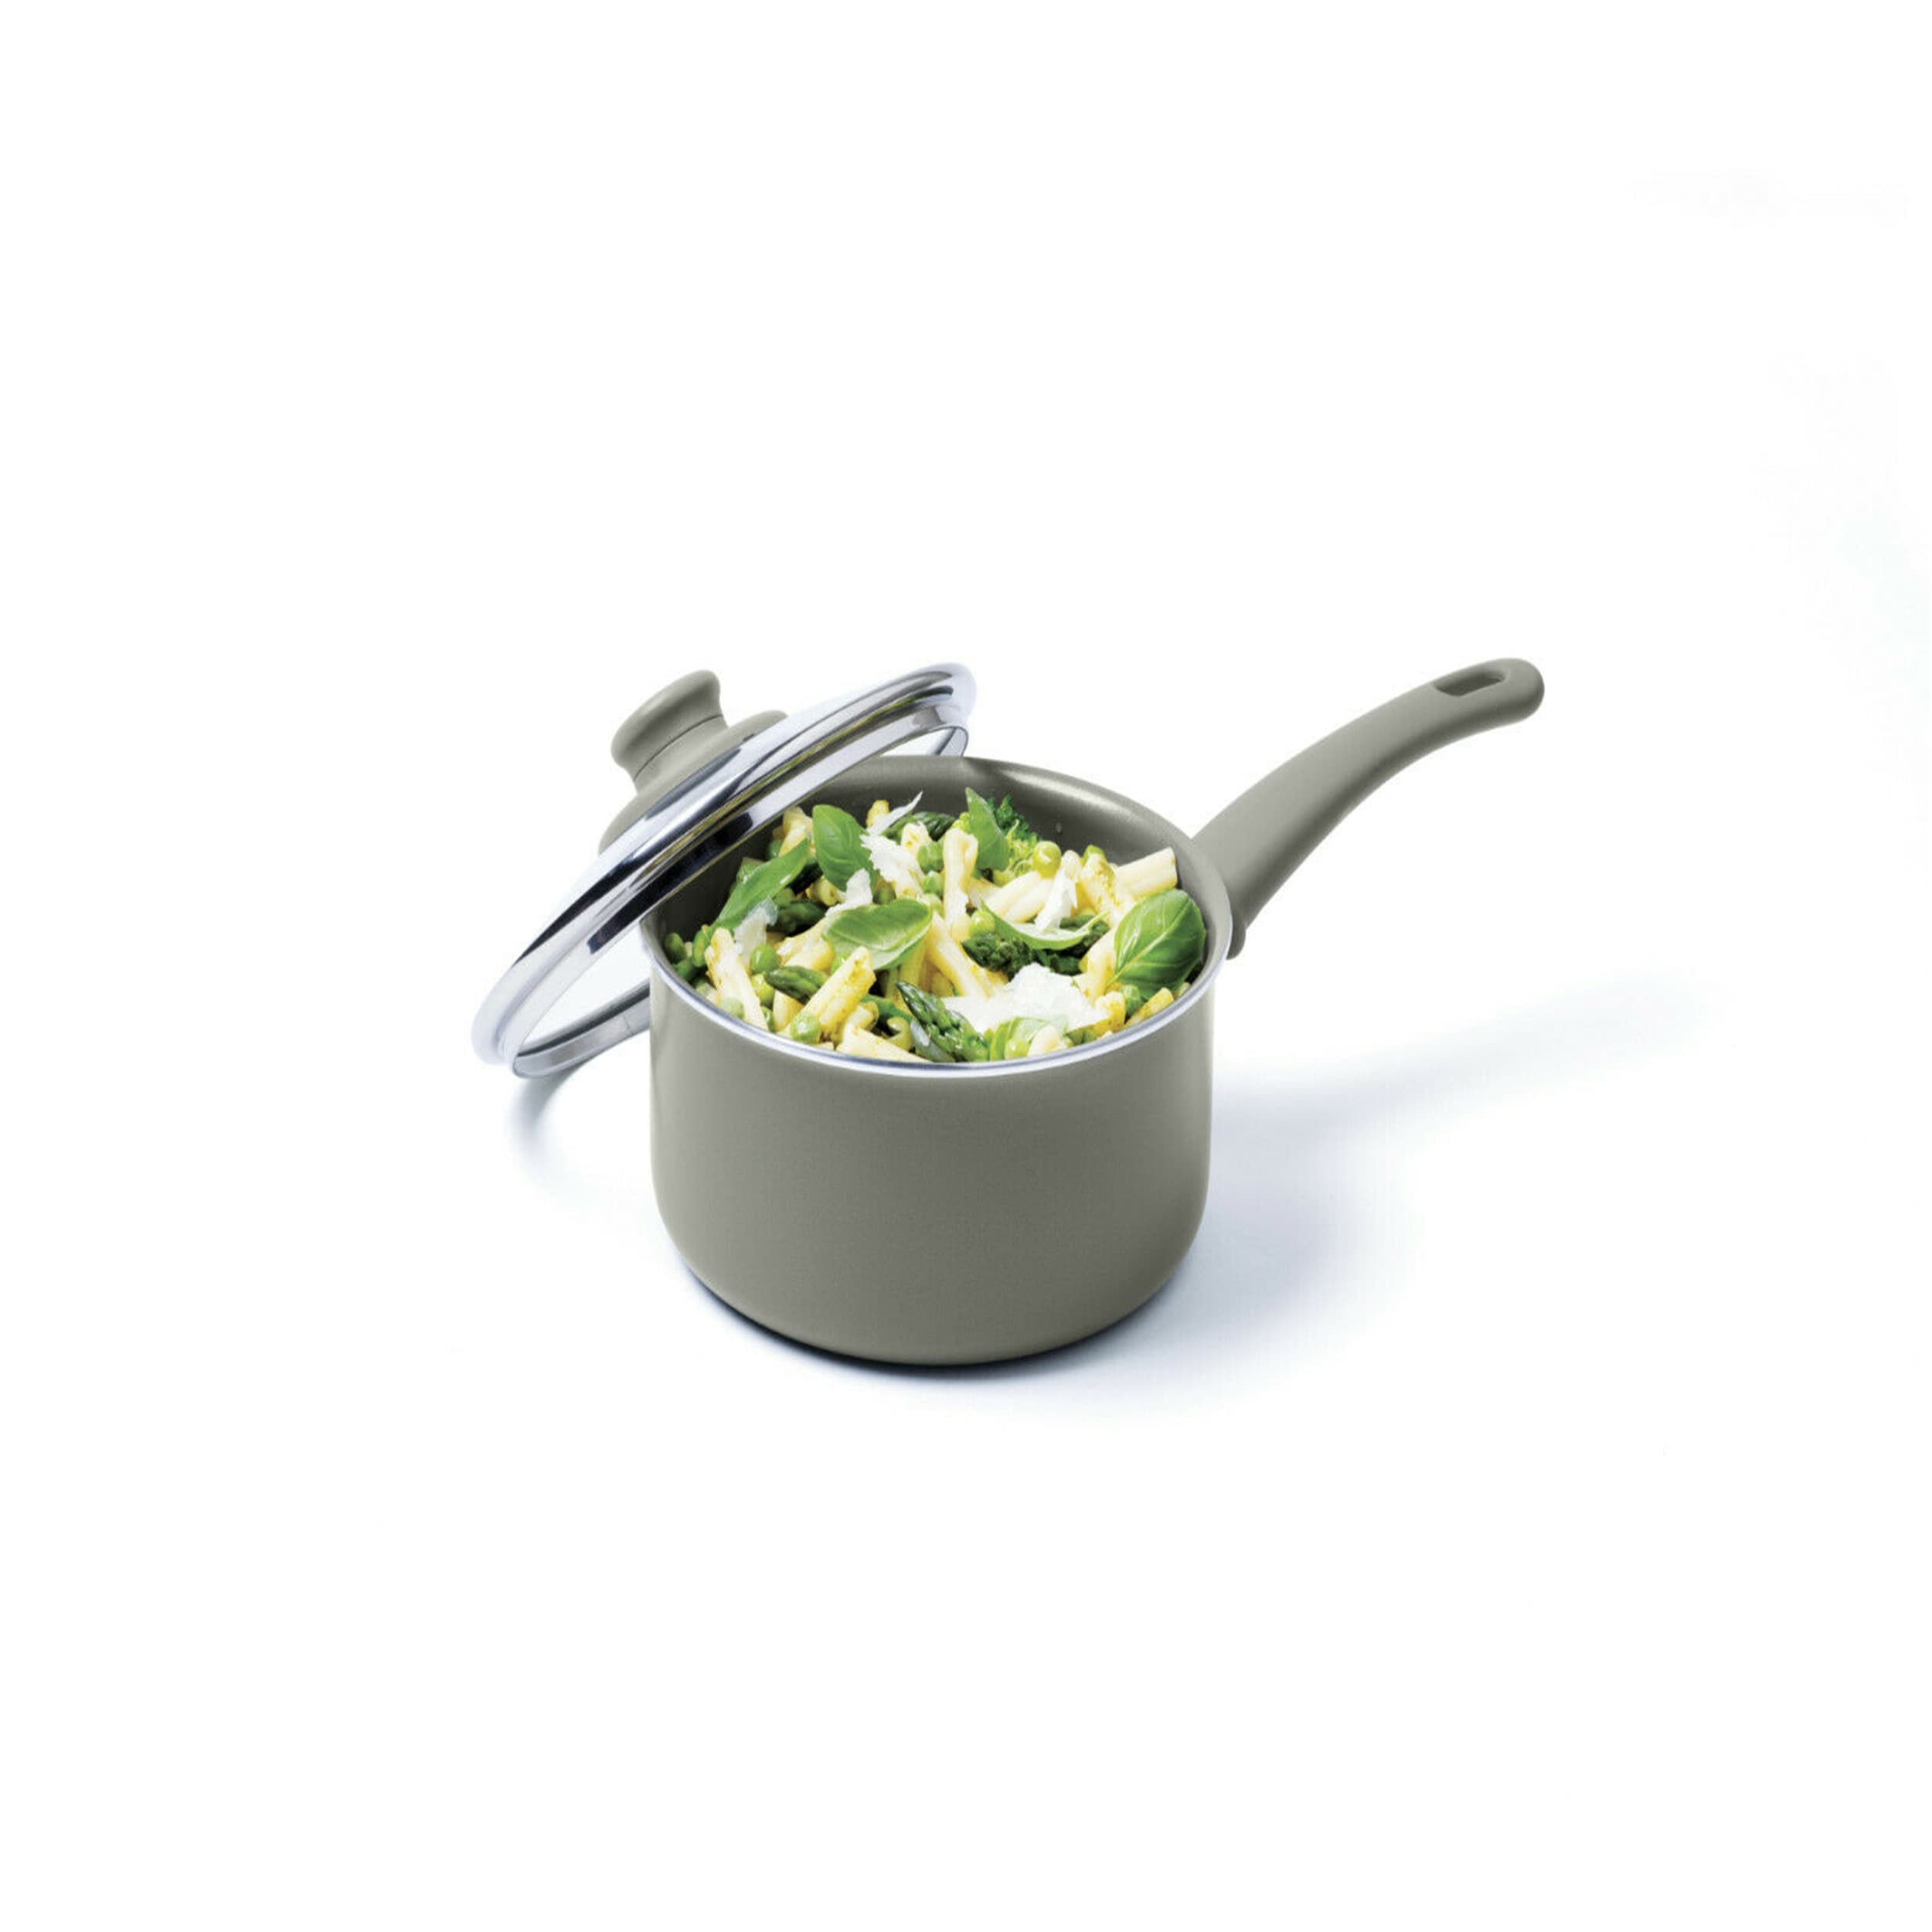 https://ak1.ostkcdn.com/images/products/is/images/direct/5e22f0fc56331081d8ef70eba47b6a6a044d3380/Cookware-Set-GreenLife-Ceramic-Nonstick-Pots-And-Pans-Dishwasher-Safe-14-Pieces.jpg